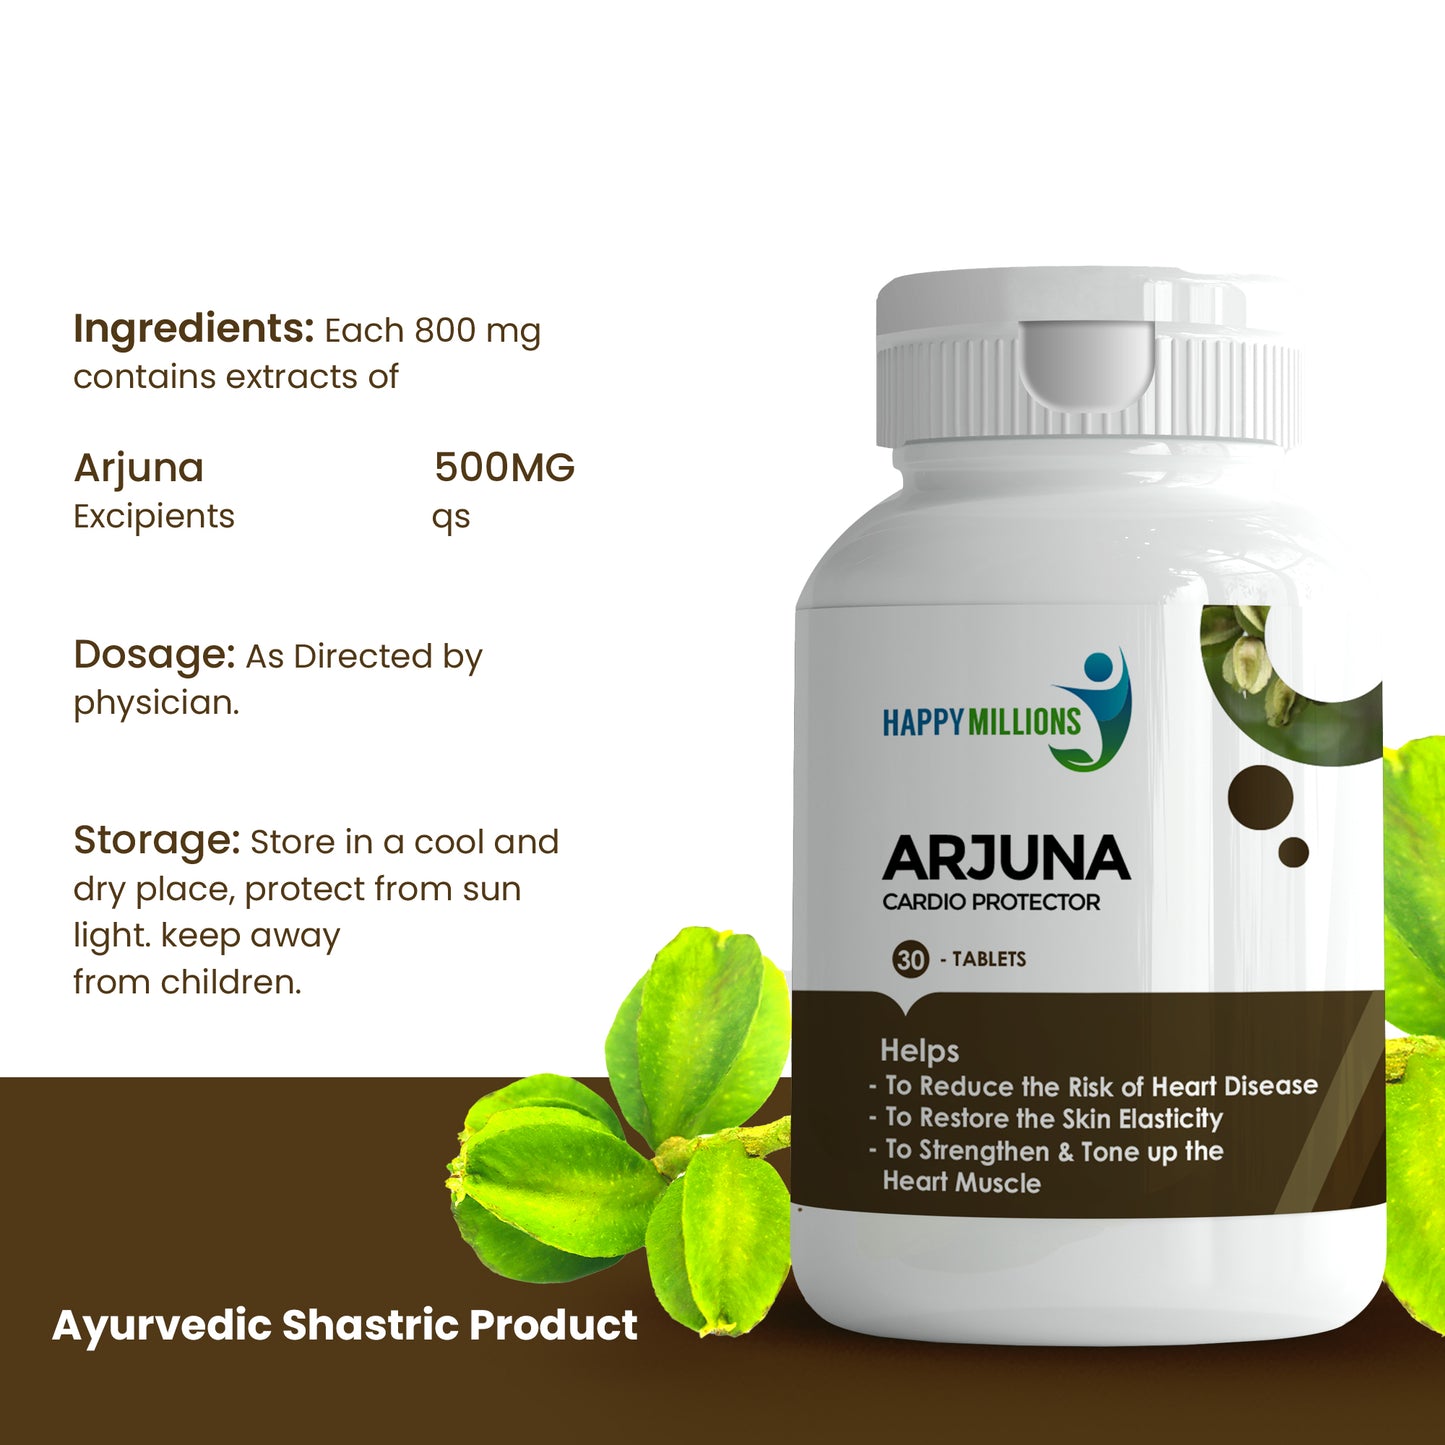 Explore Pure & Potent Happy Millions Arjuna Ingredients for Heart Health and Cardiovascular Support.